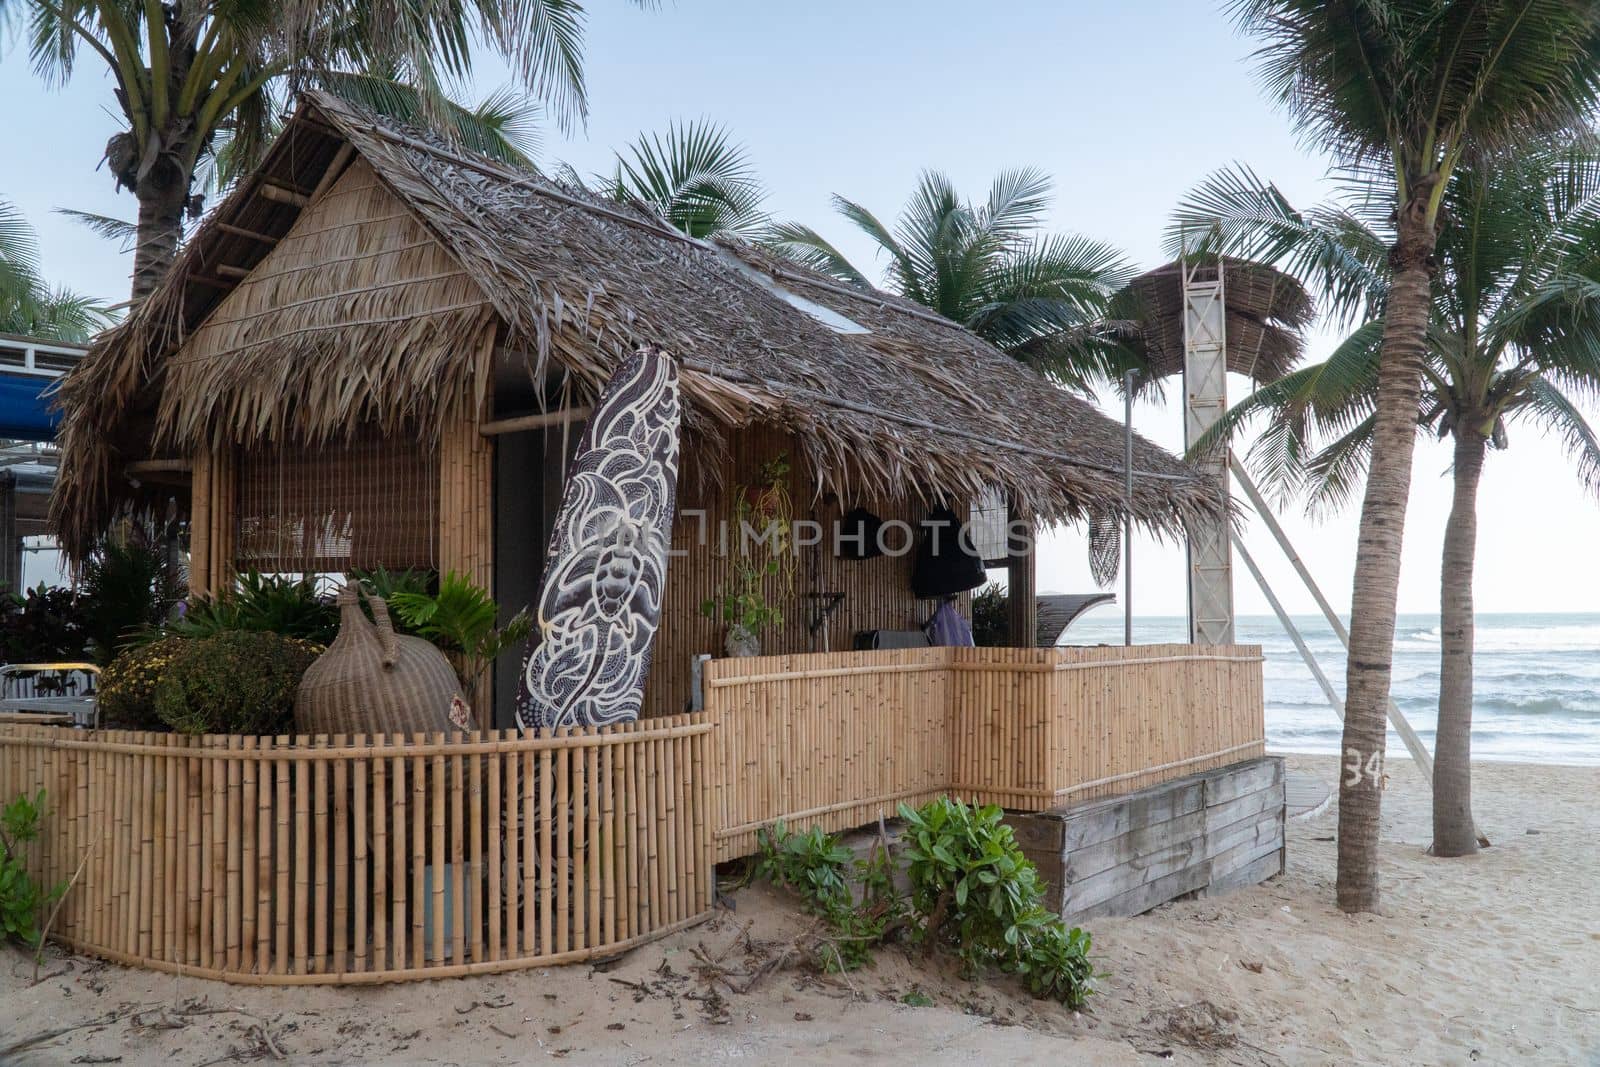 Beach bungalow made of palm leaves on the beach with a surfboard. High quality photo